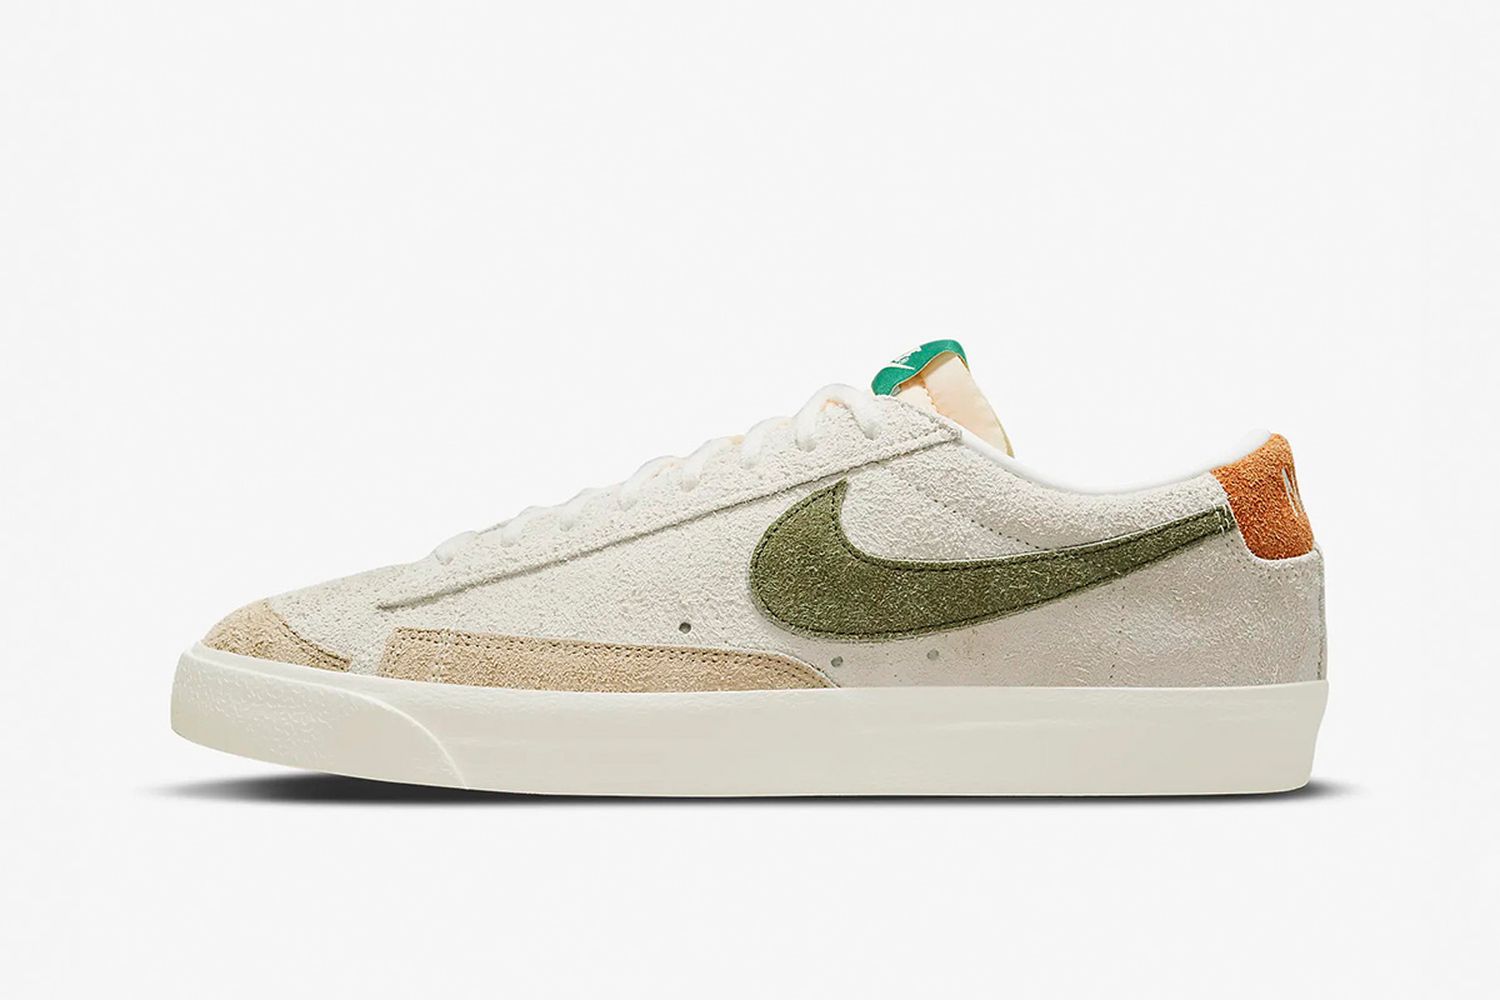 Shop 10 the Retro Nike Sneakers for